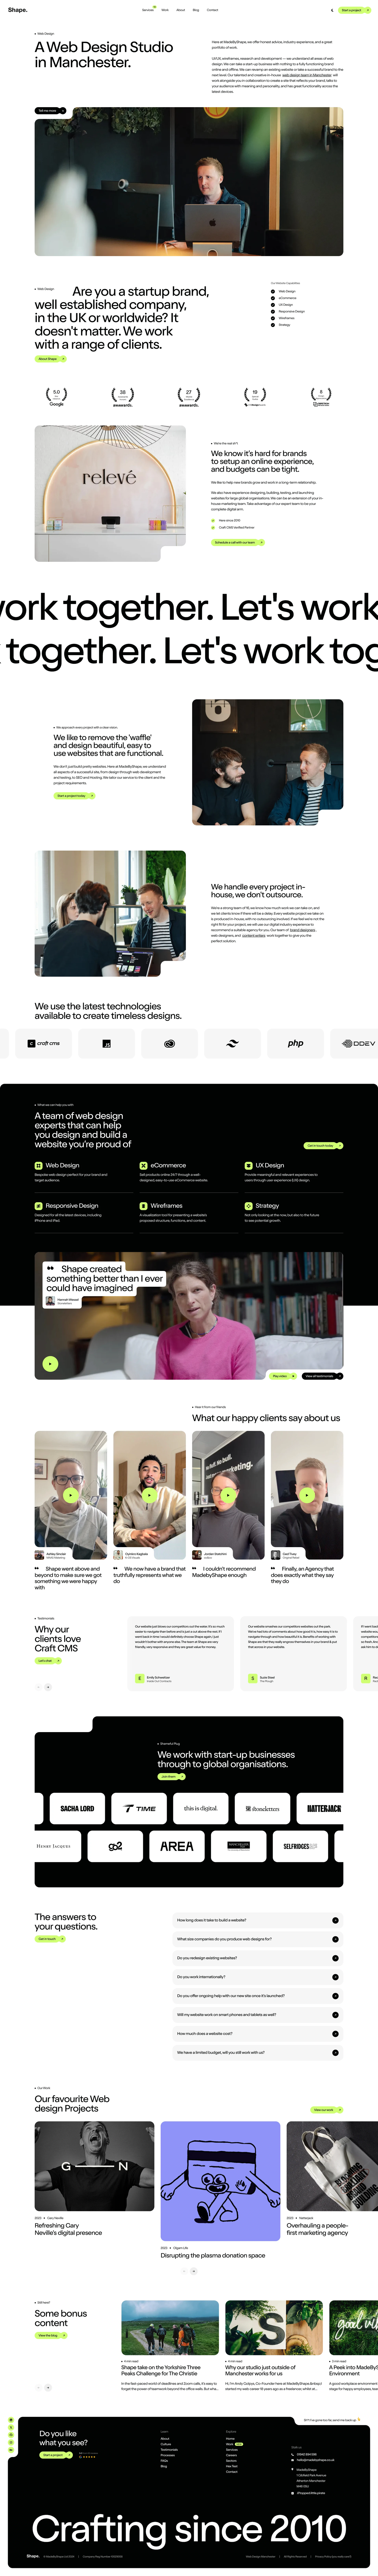 MadeByShape Landing Page Example: An independent web design and branding agency in Manchester set up in 2010 who care, build relationships, have industry experience, and win awards. 